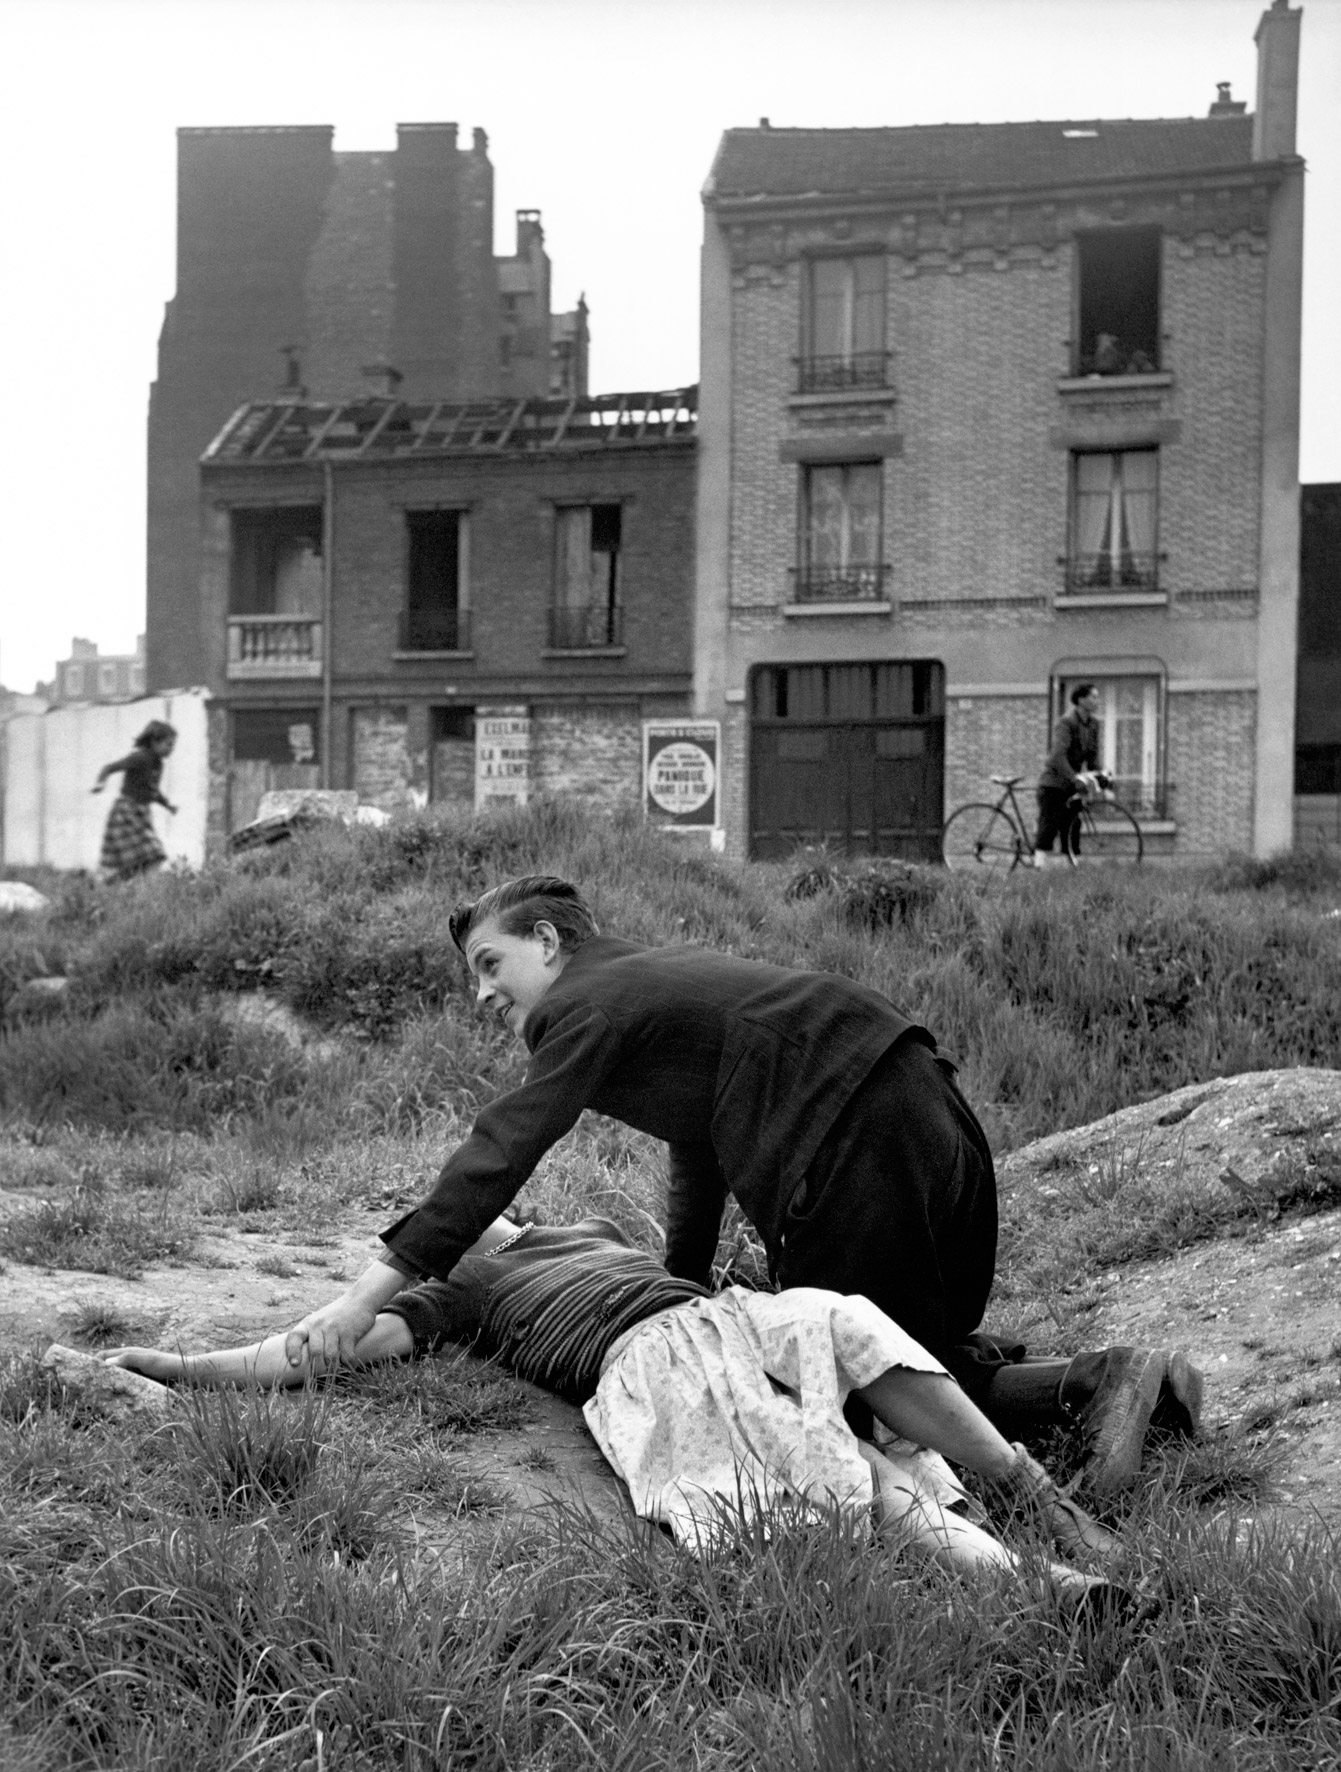 Sabine Weiss photo from the Jeu De Paume exhibition in Paris, France.